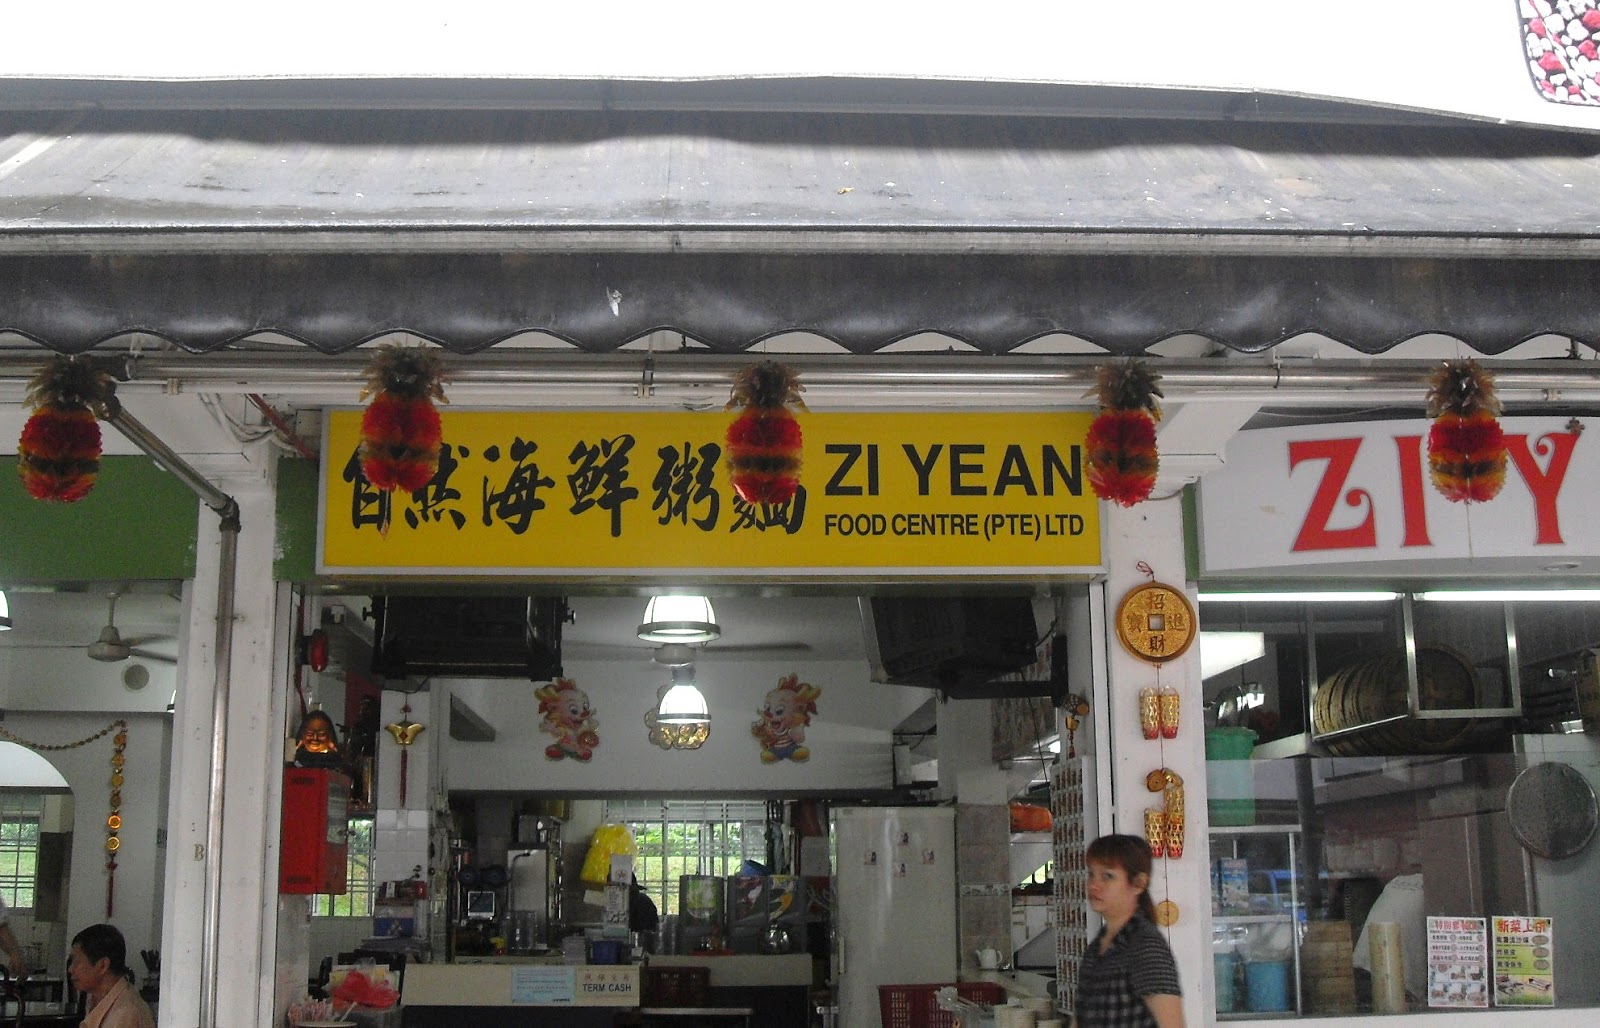 Freedom LC Life: ZI YEAN Food Centre (Pte) Ltd - Hong Kong ...